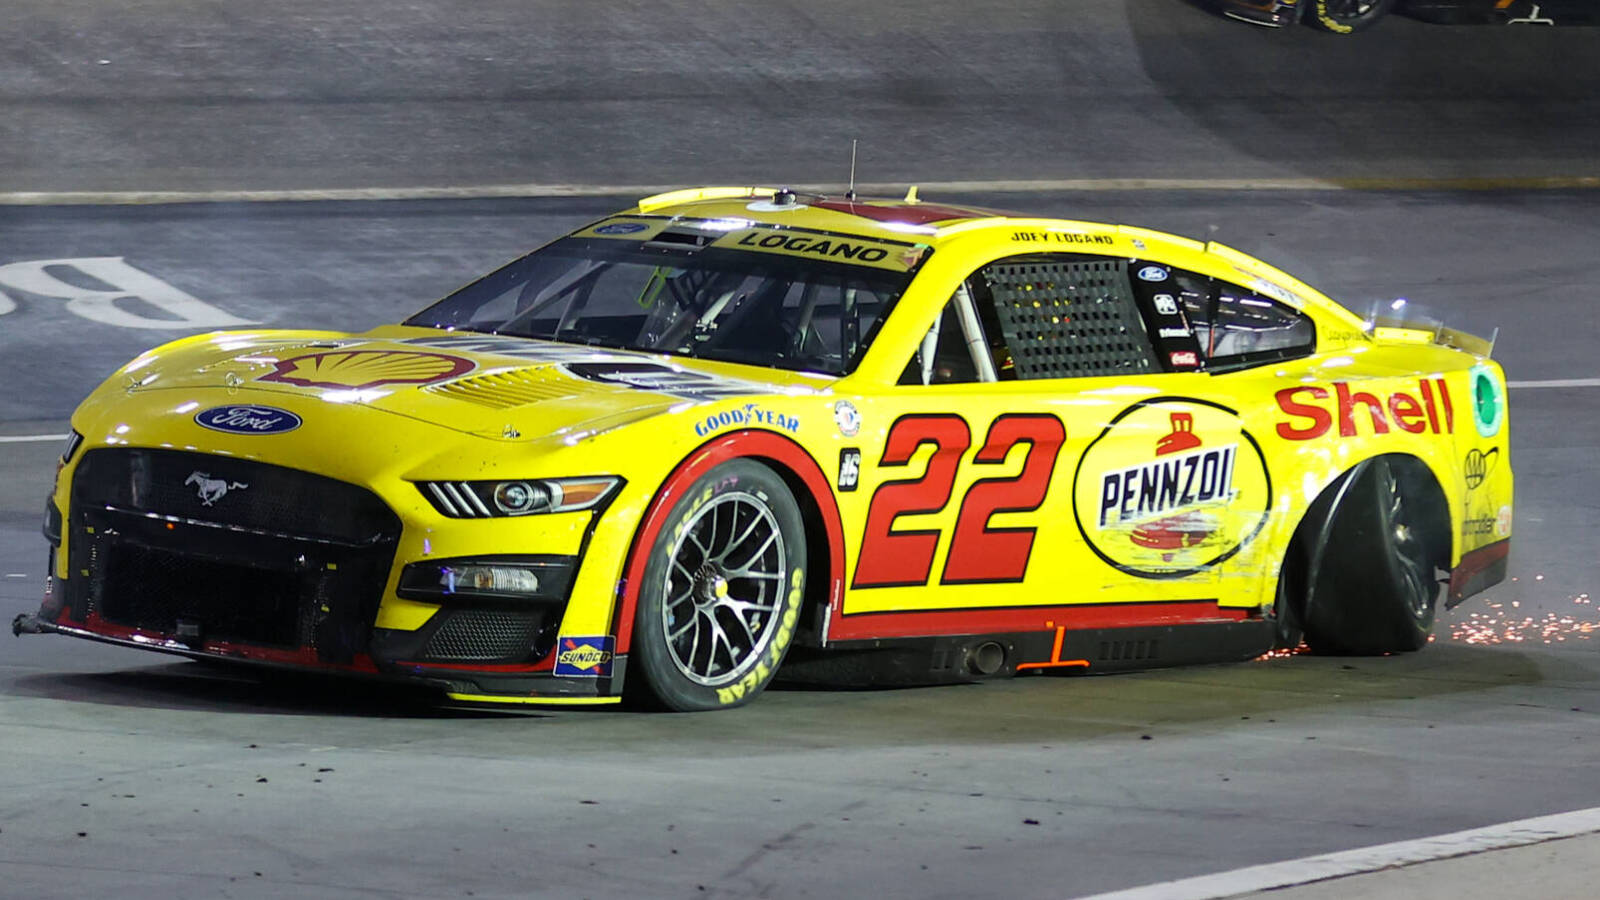 Reigning champ Joey Logano, retiring Kevin Harvick are surprise NASCAR playoff eliminations at Bristol